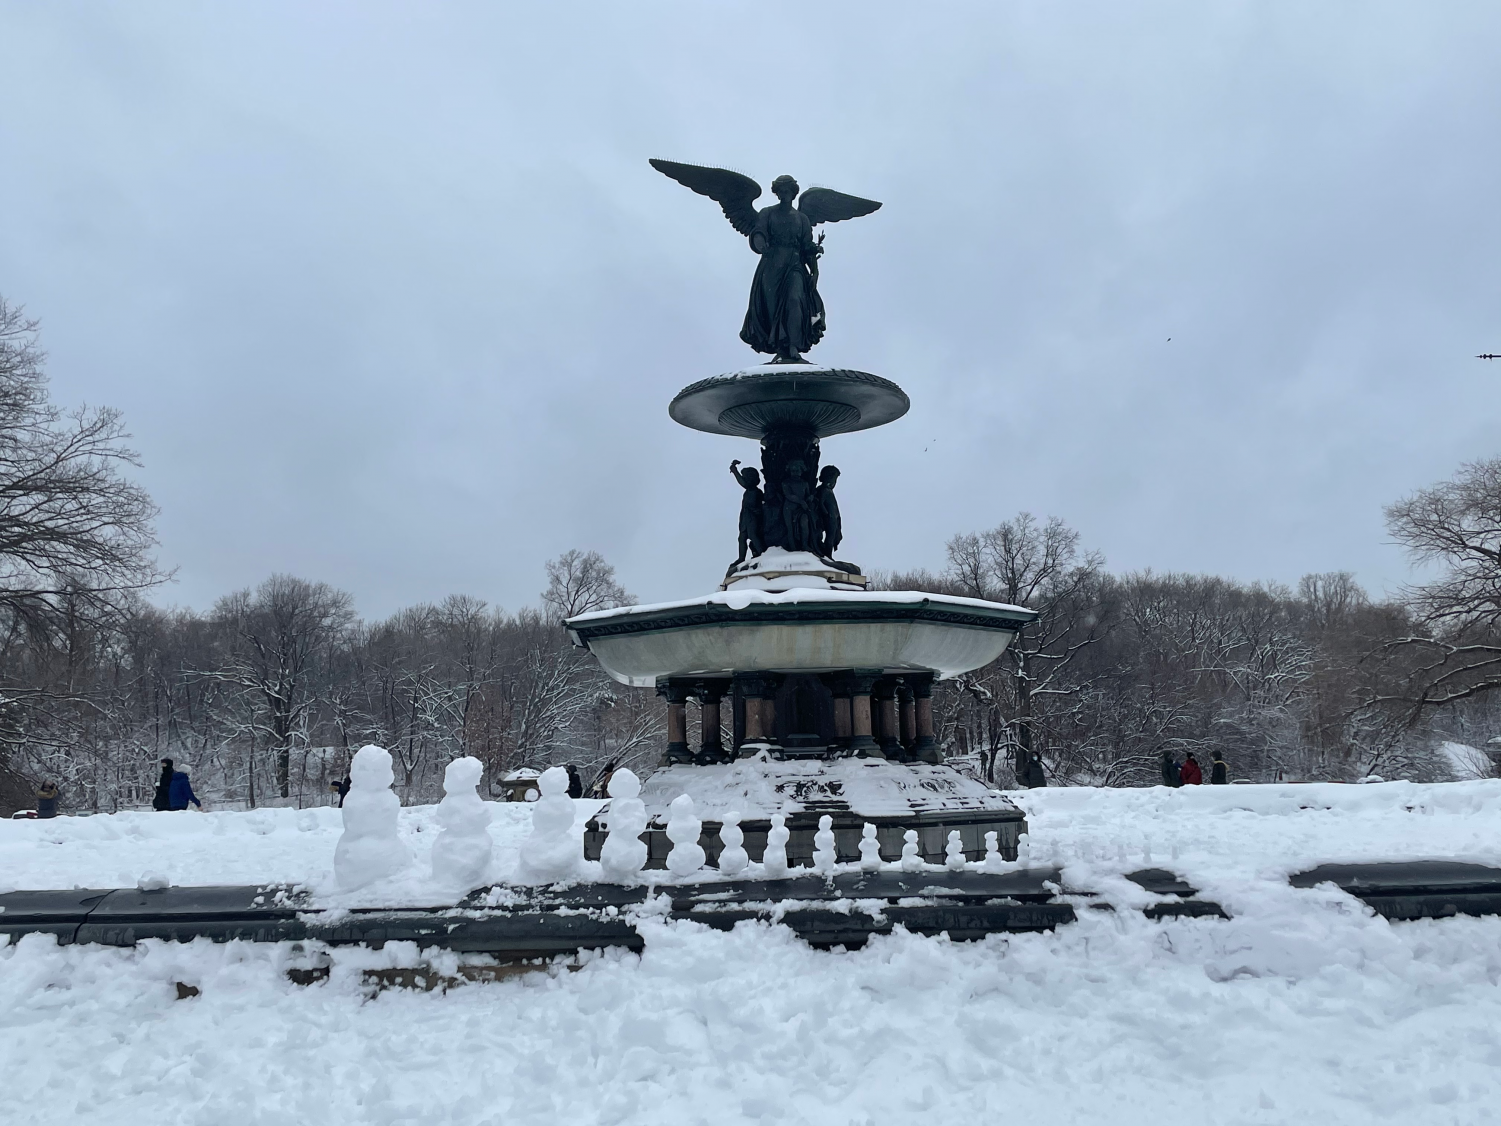 the Bethesda fountain with a series of snowmen in front of it, each getting progressively smaller